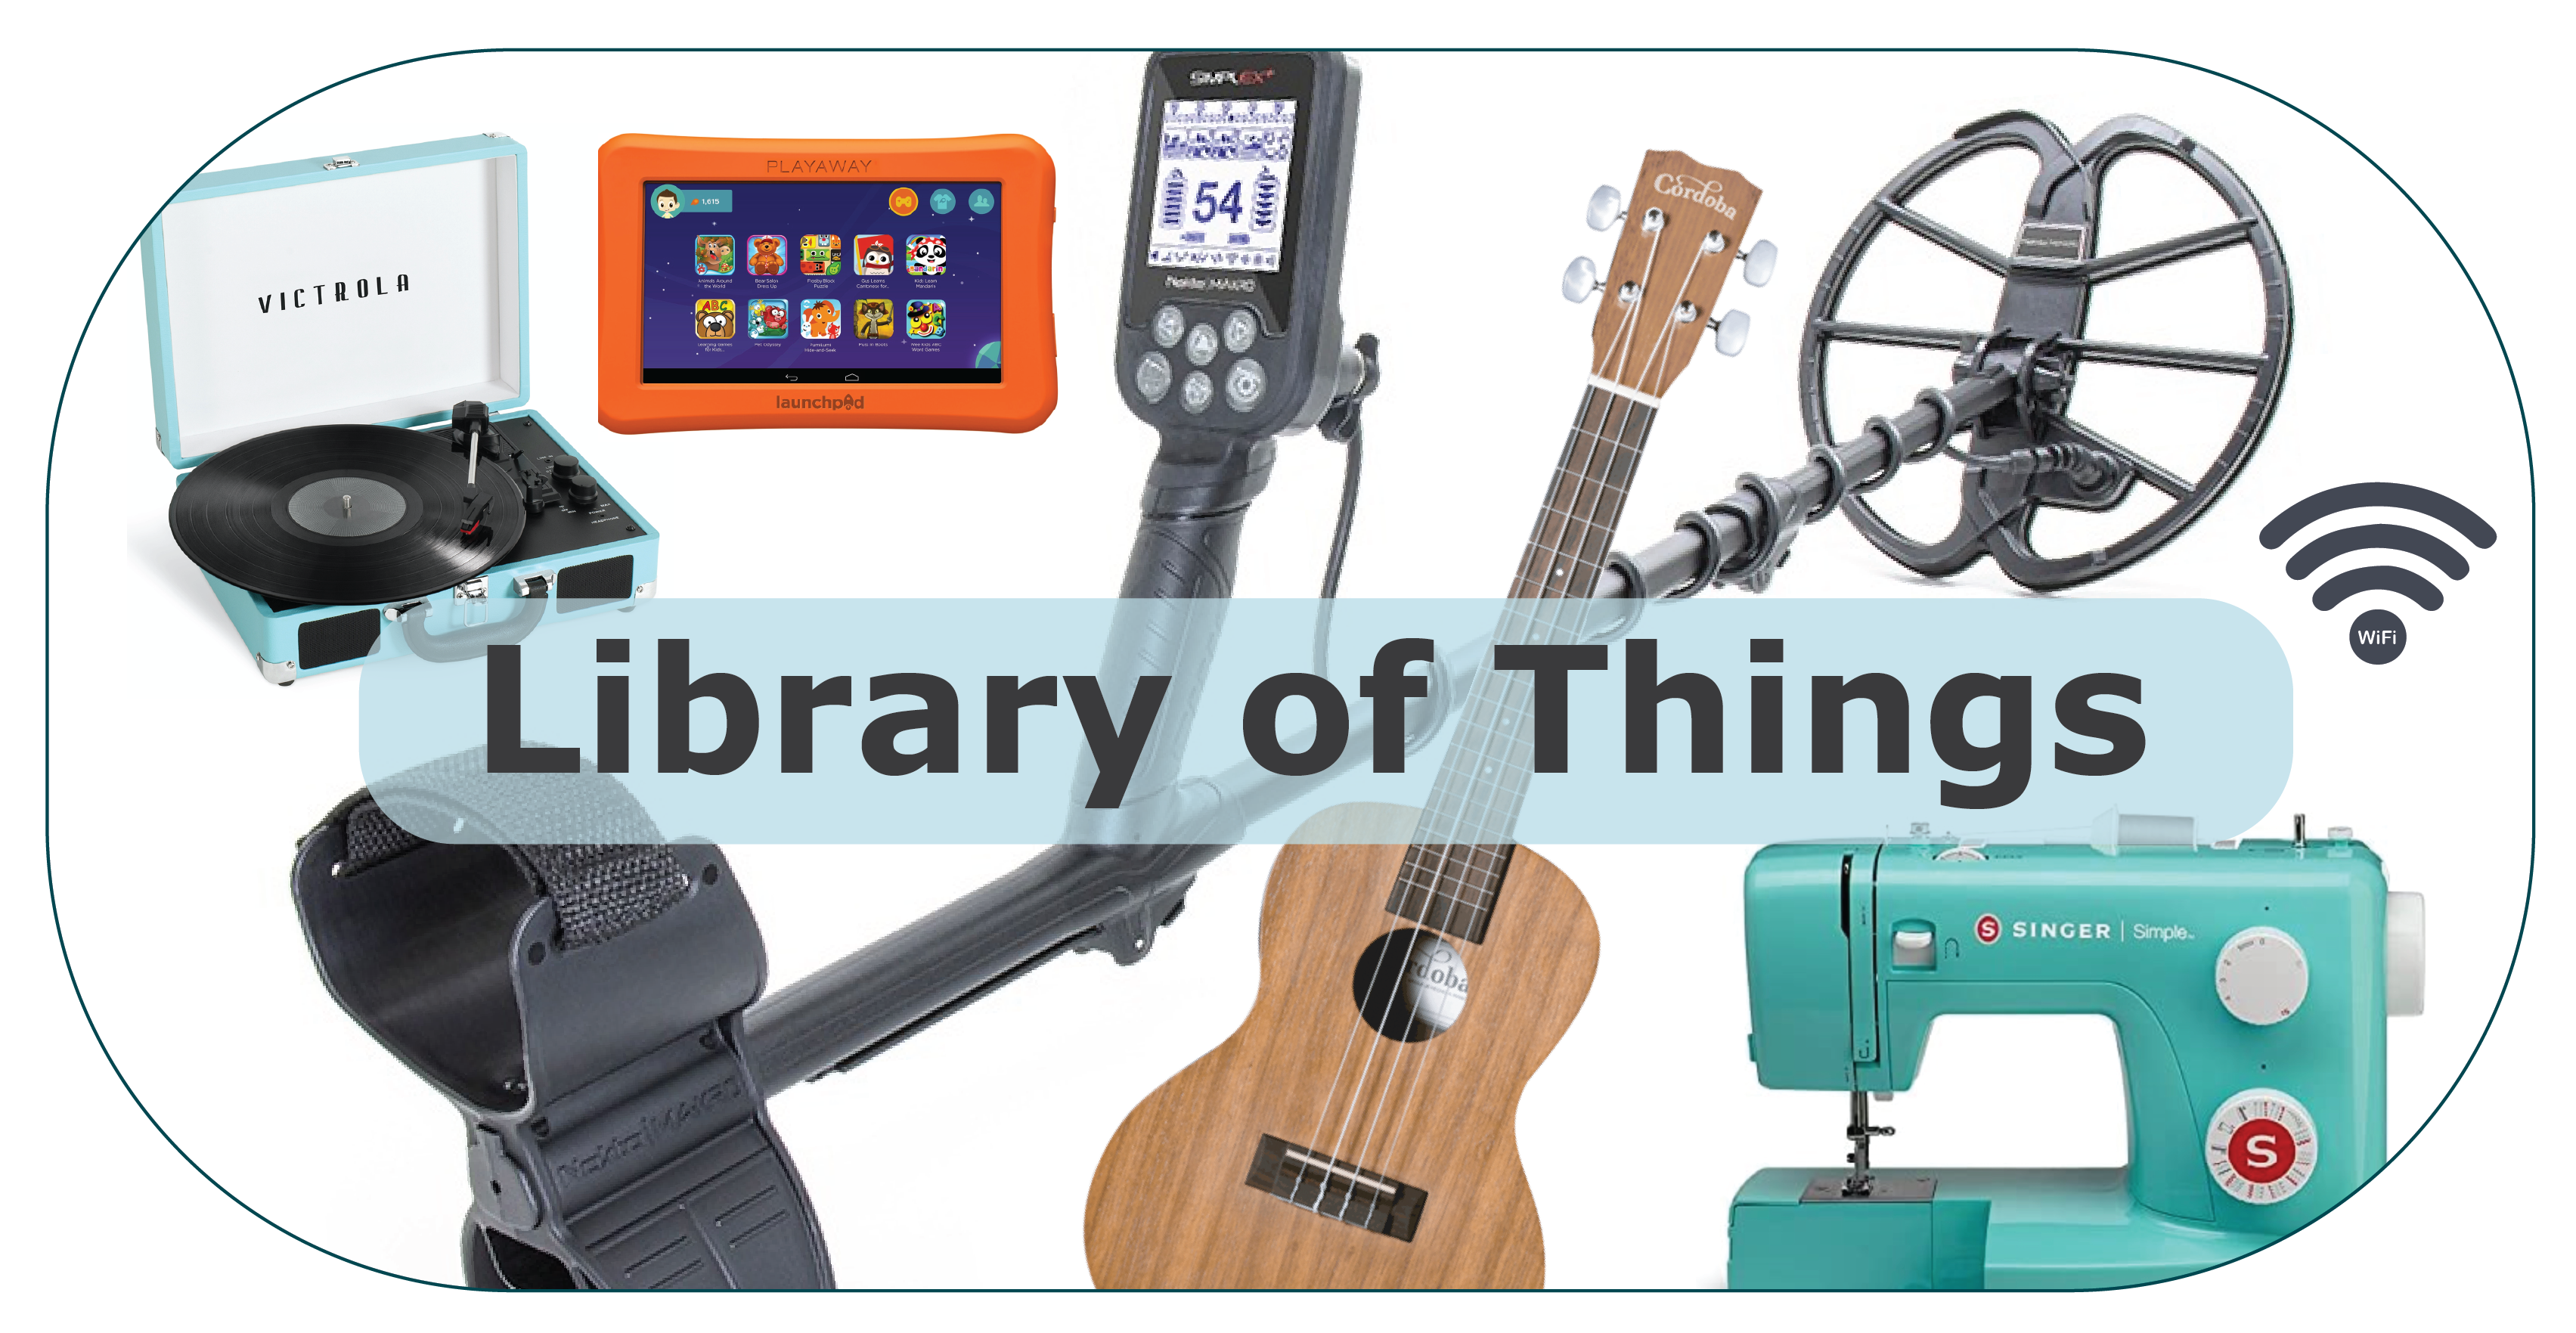 A link to our library of things webpage